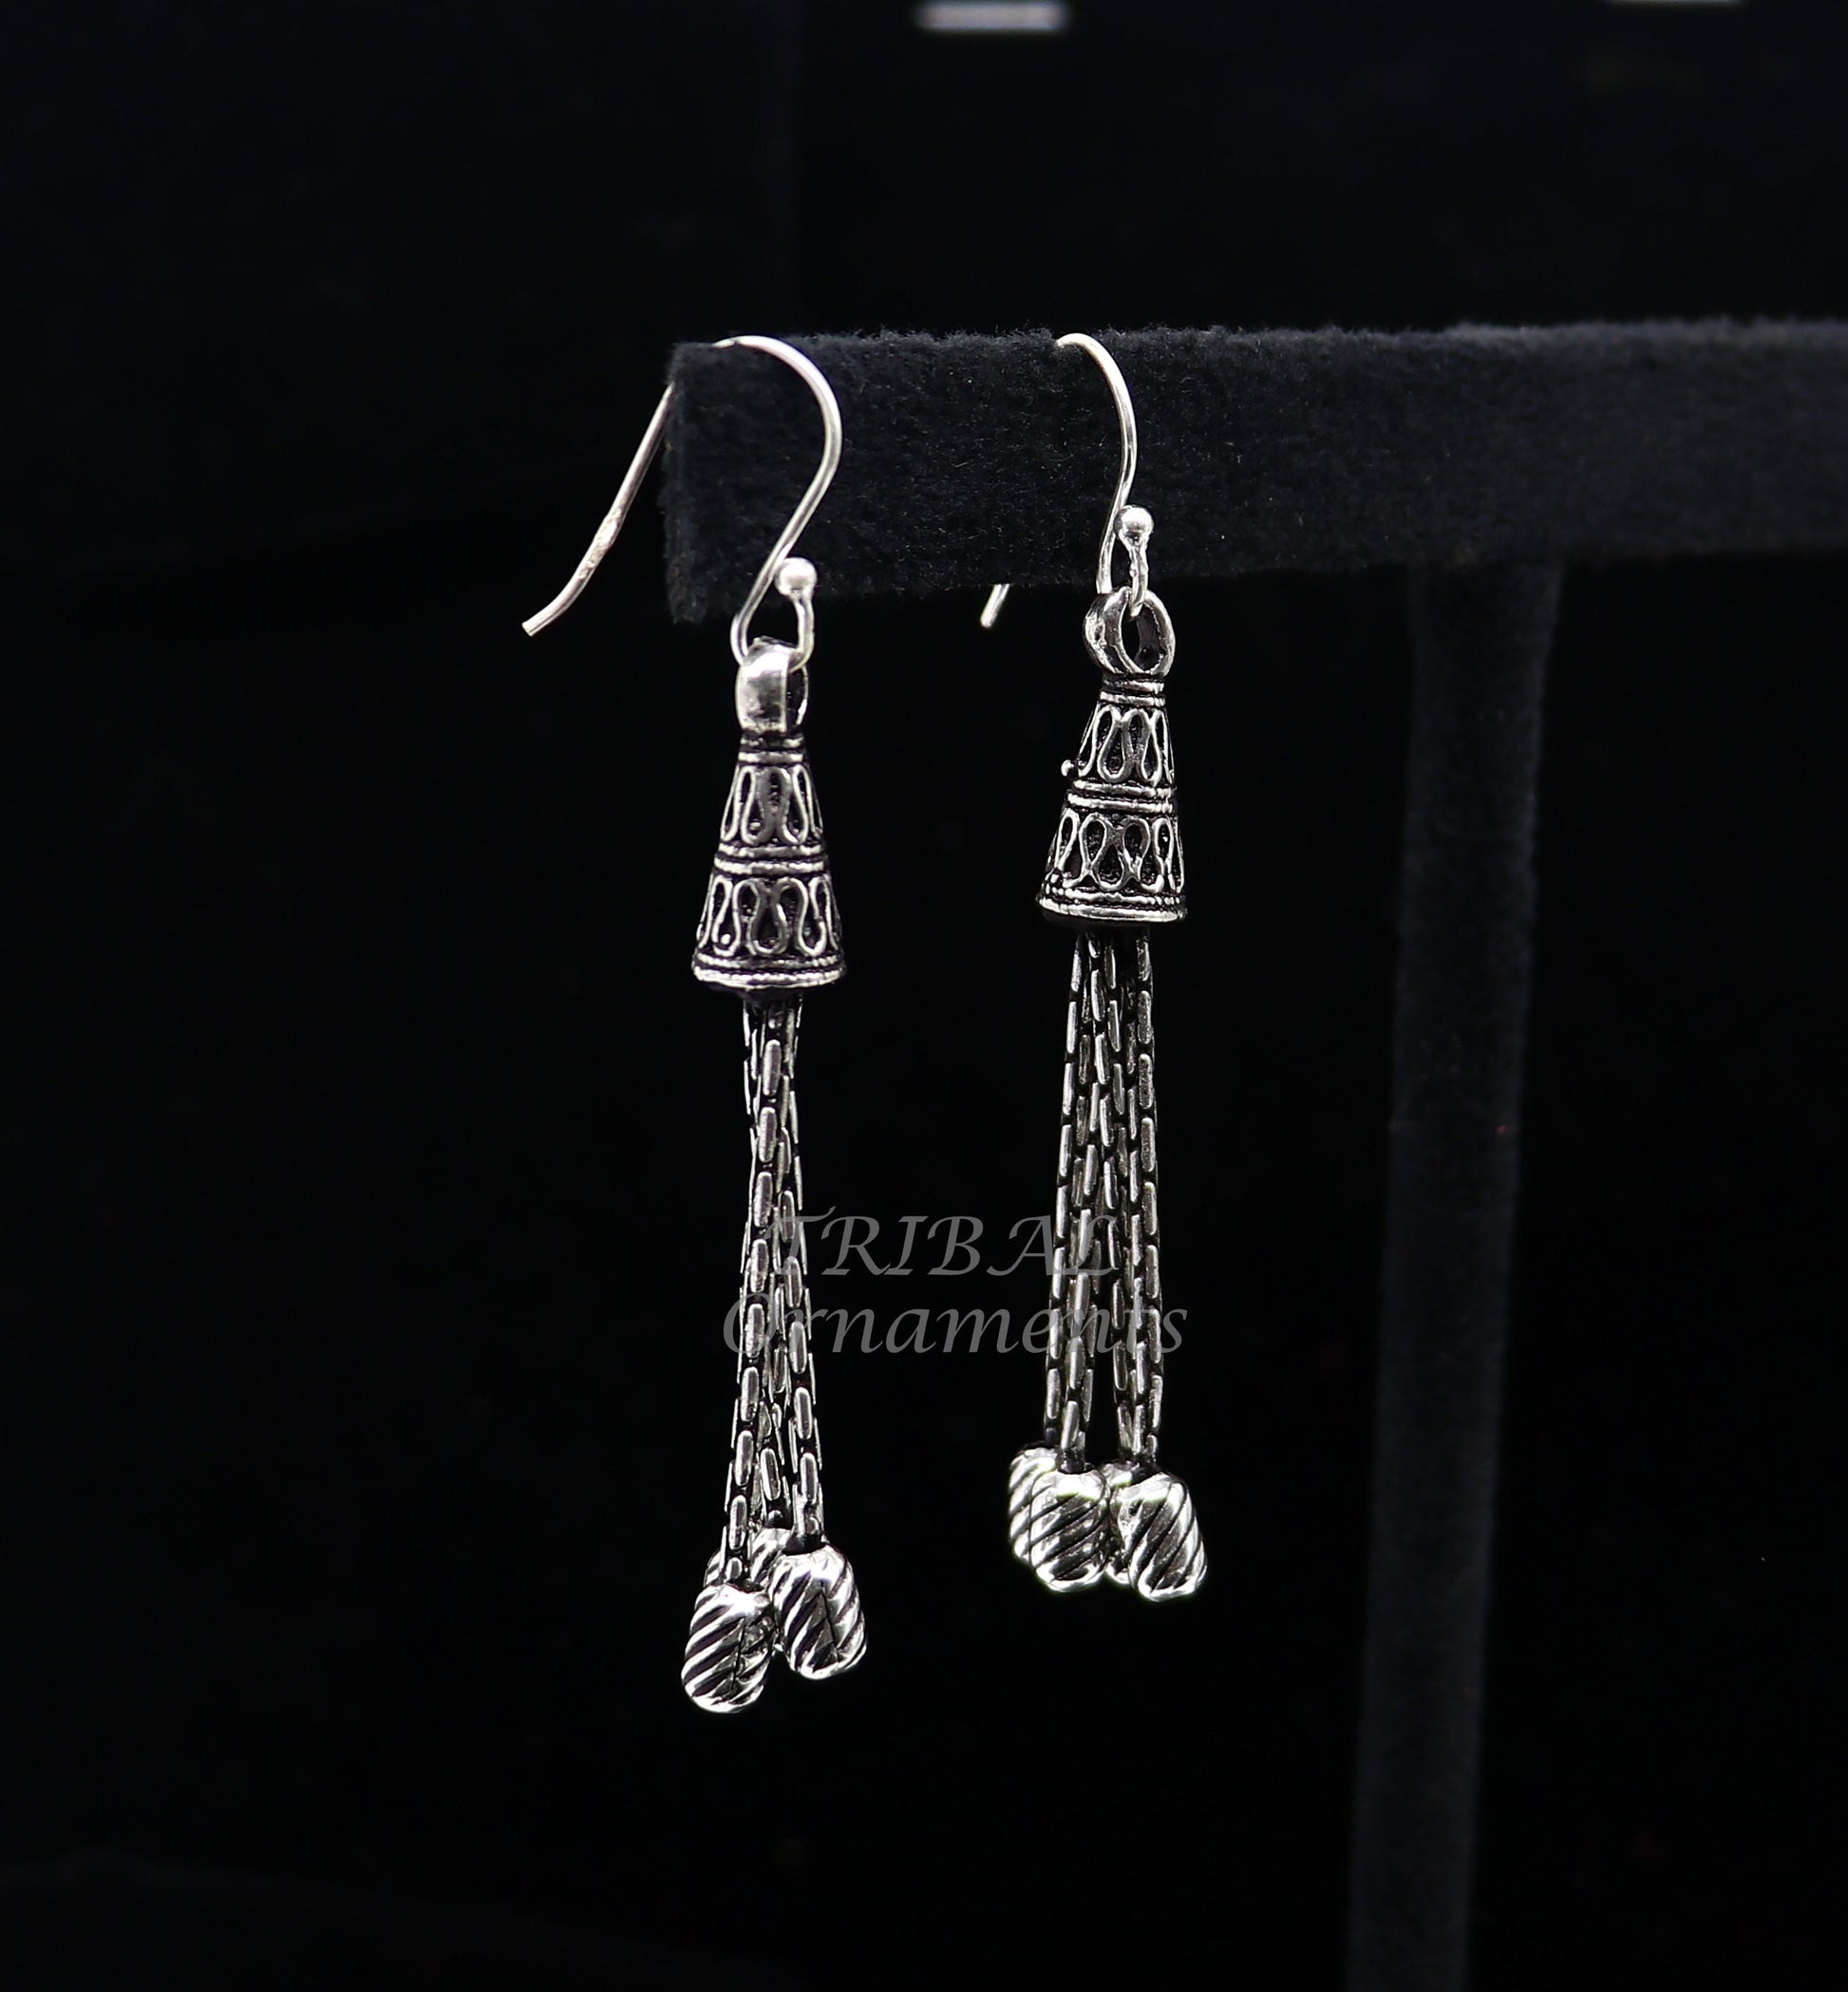 925 sterling silver handmade fabulous hoops earring with gorgeous hanging drops, customized large earring personalized gift s1141 - TRIBAL ORNAMENTS